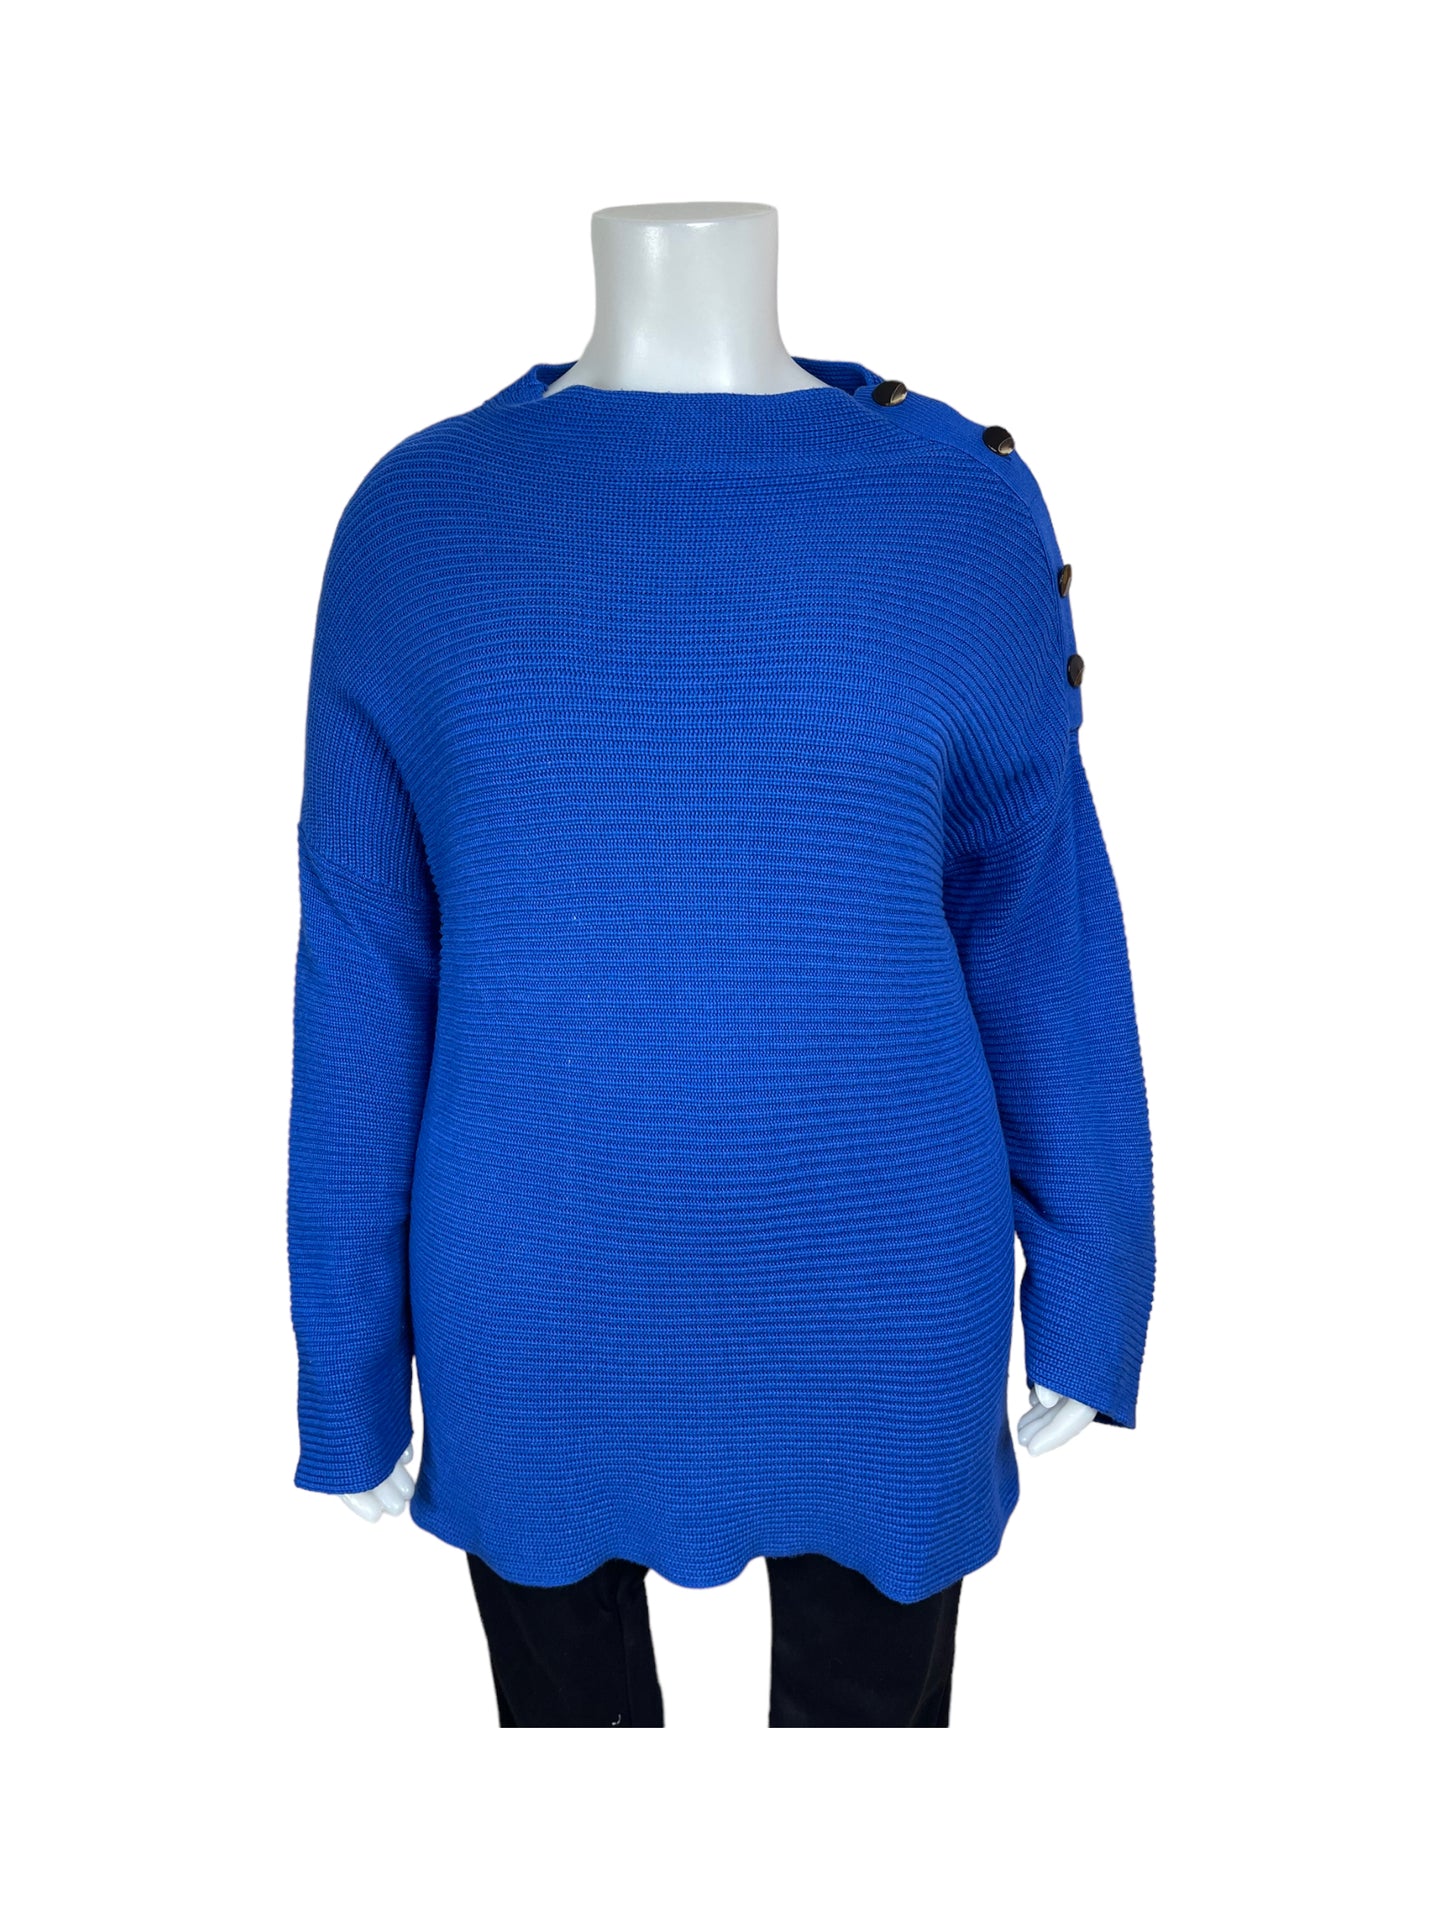 “A MTL 1980” Blue Sweater w/ Dark Stone Buttons on Left Shoulder (1X)